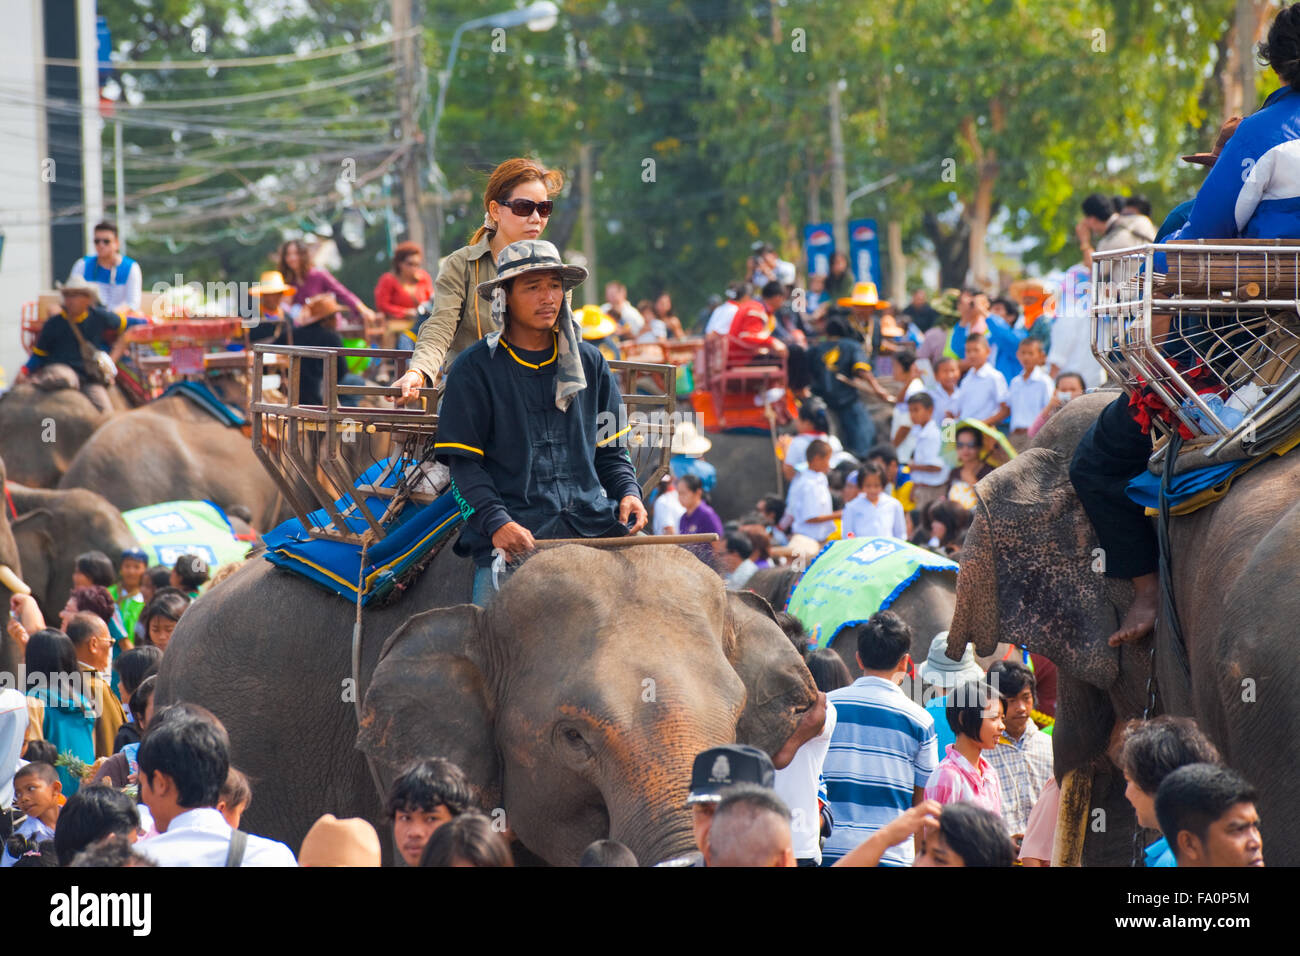 Female Thai passenger riding on elephant back in a large crowd of people and animals at the annual Surin Elephant Roundup Stock Photo